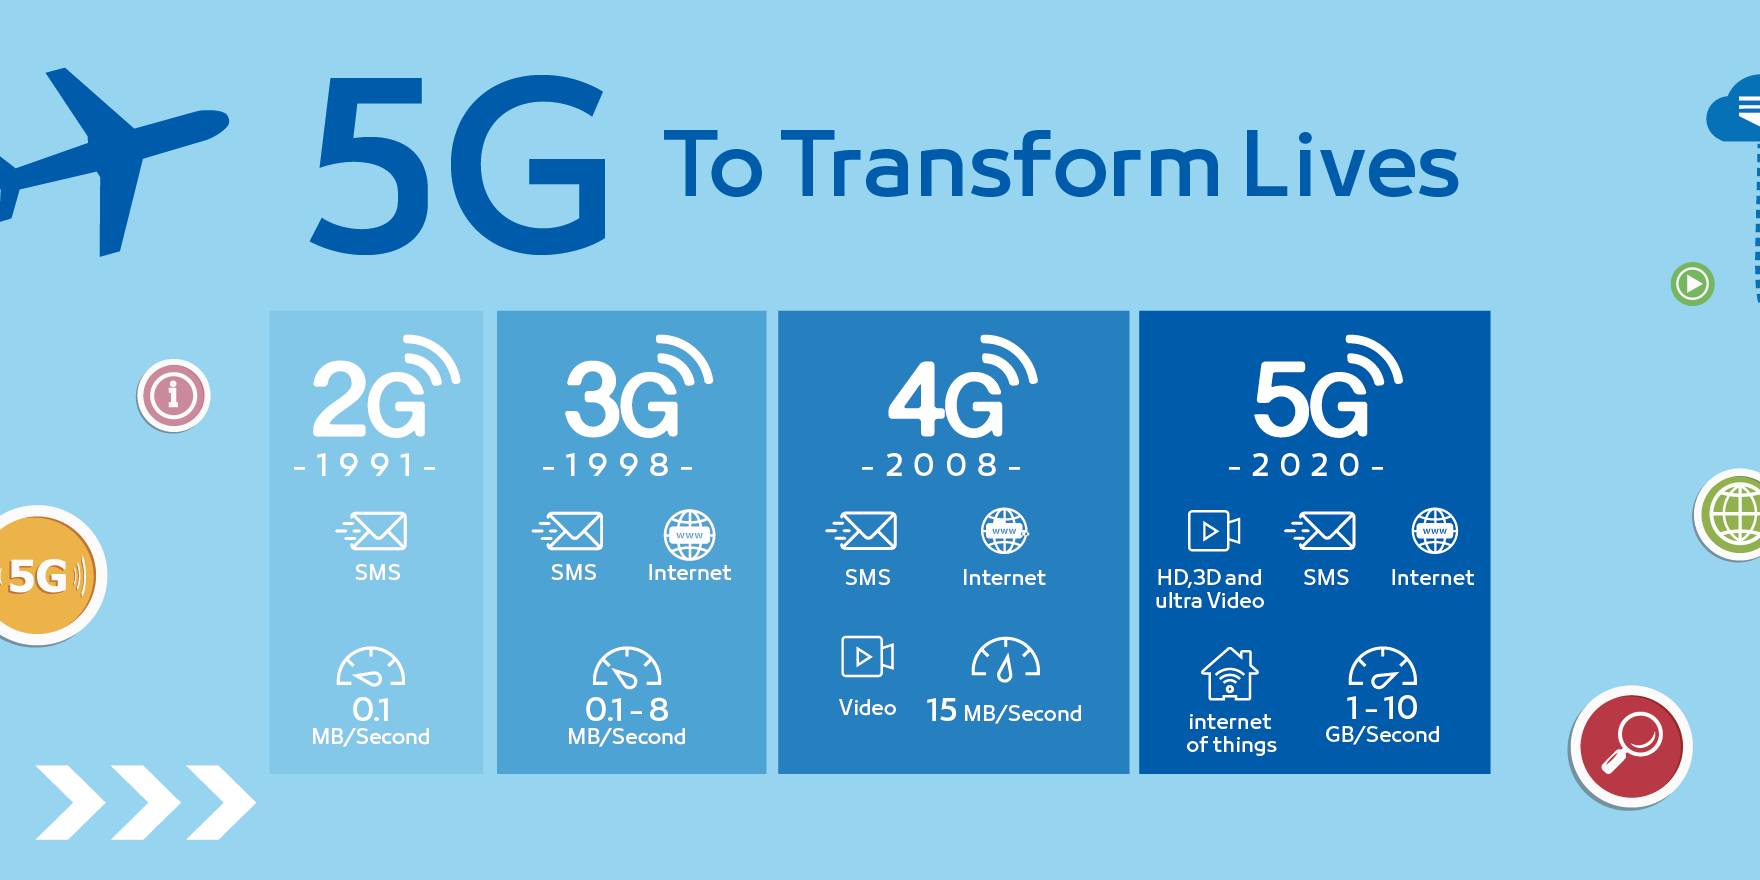 Industries across Saudi Arabia today — including healthcare, education, and banking — are already benefiting from the incredible leaps in bandwidth and network speeds provided by 5G.